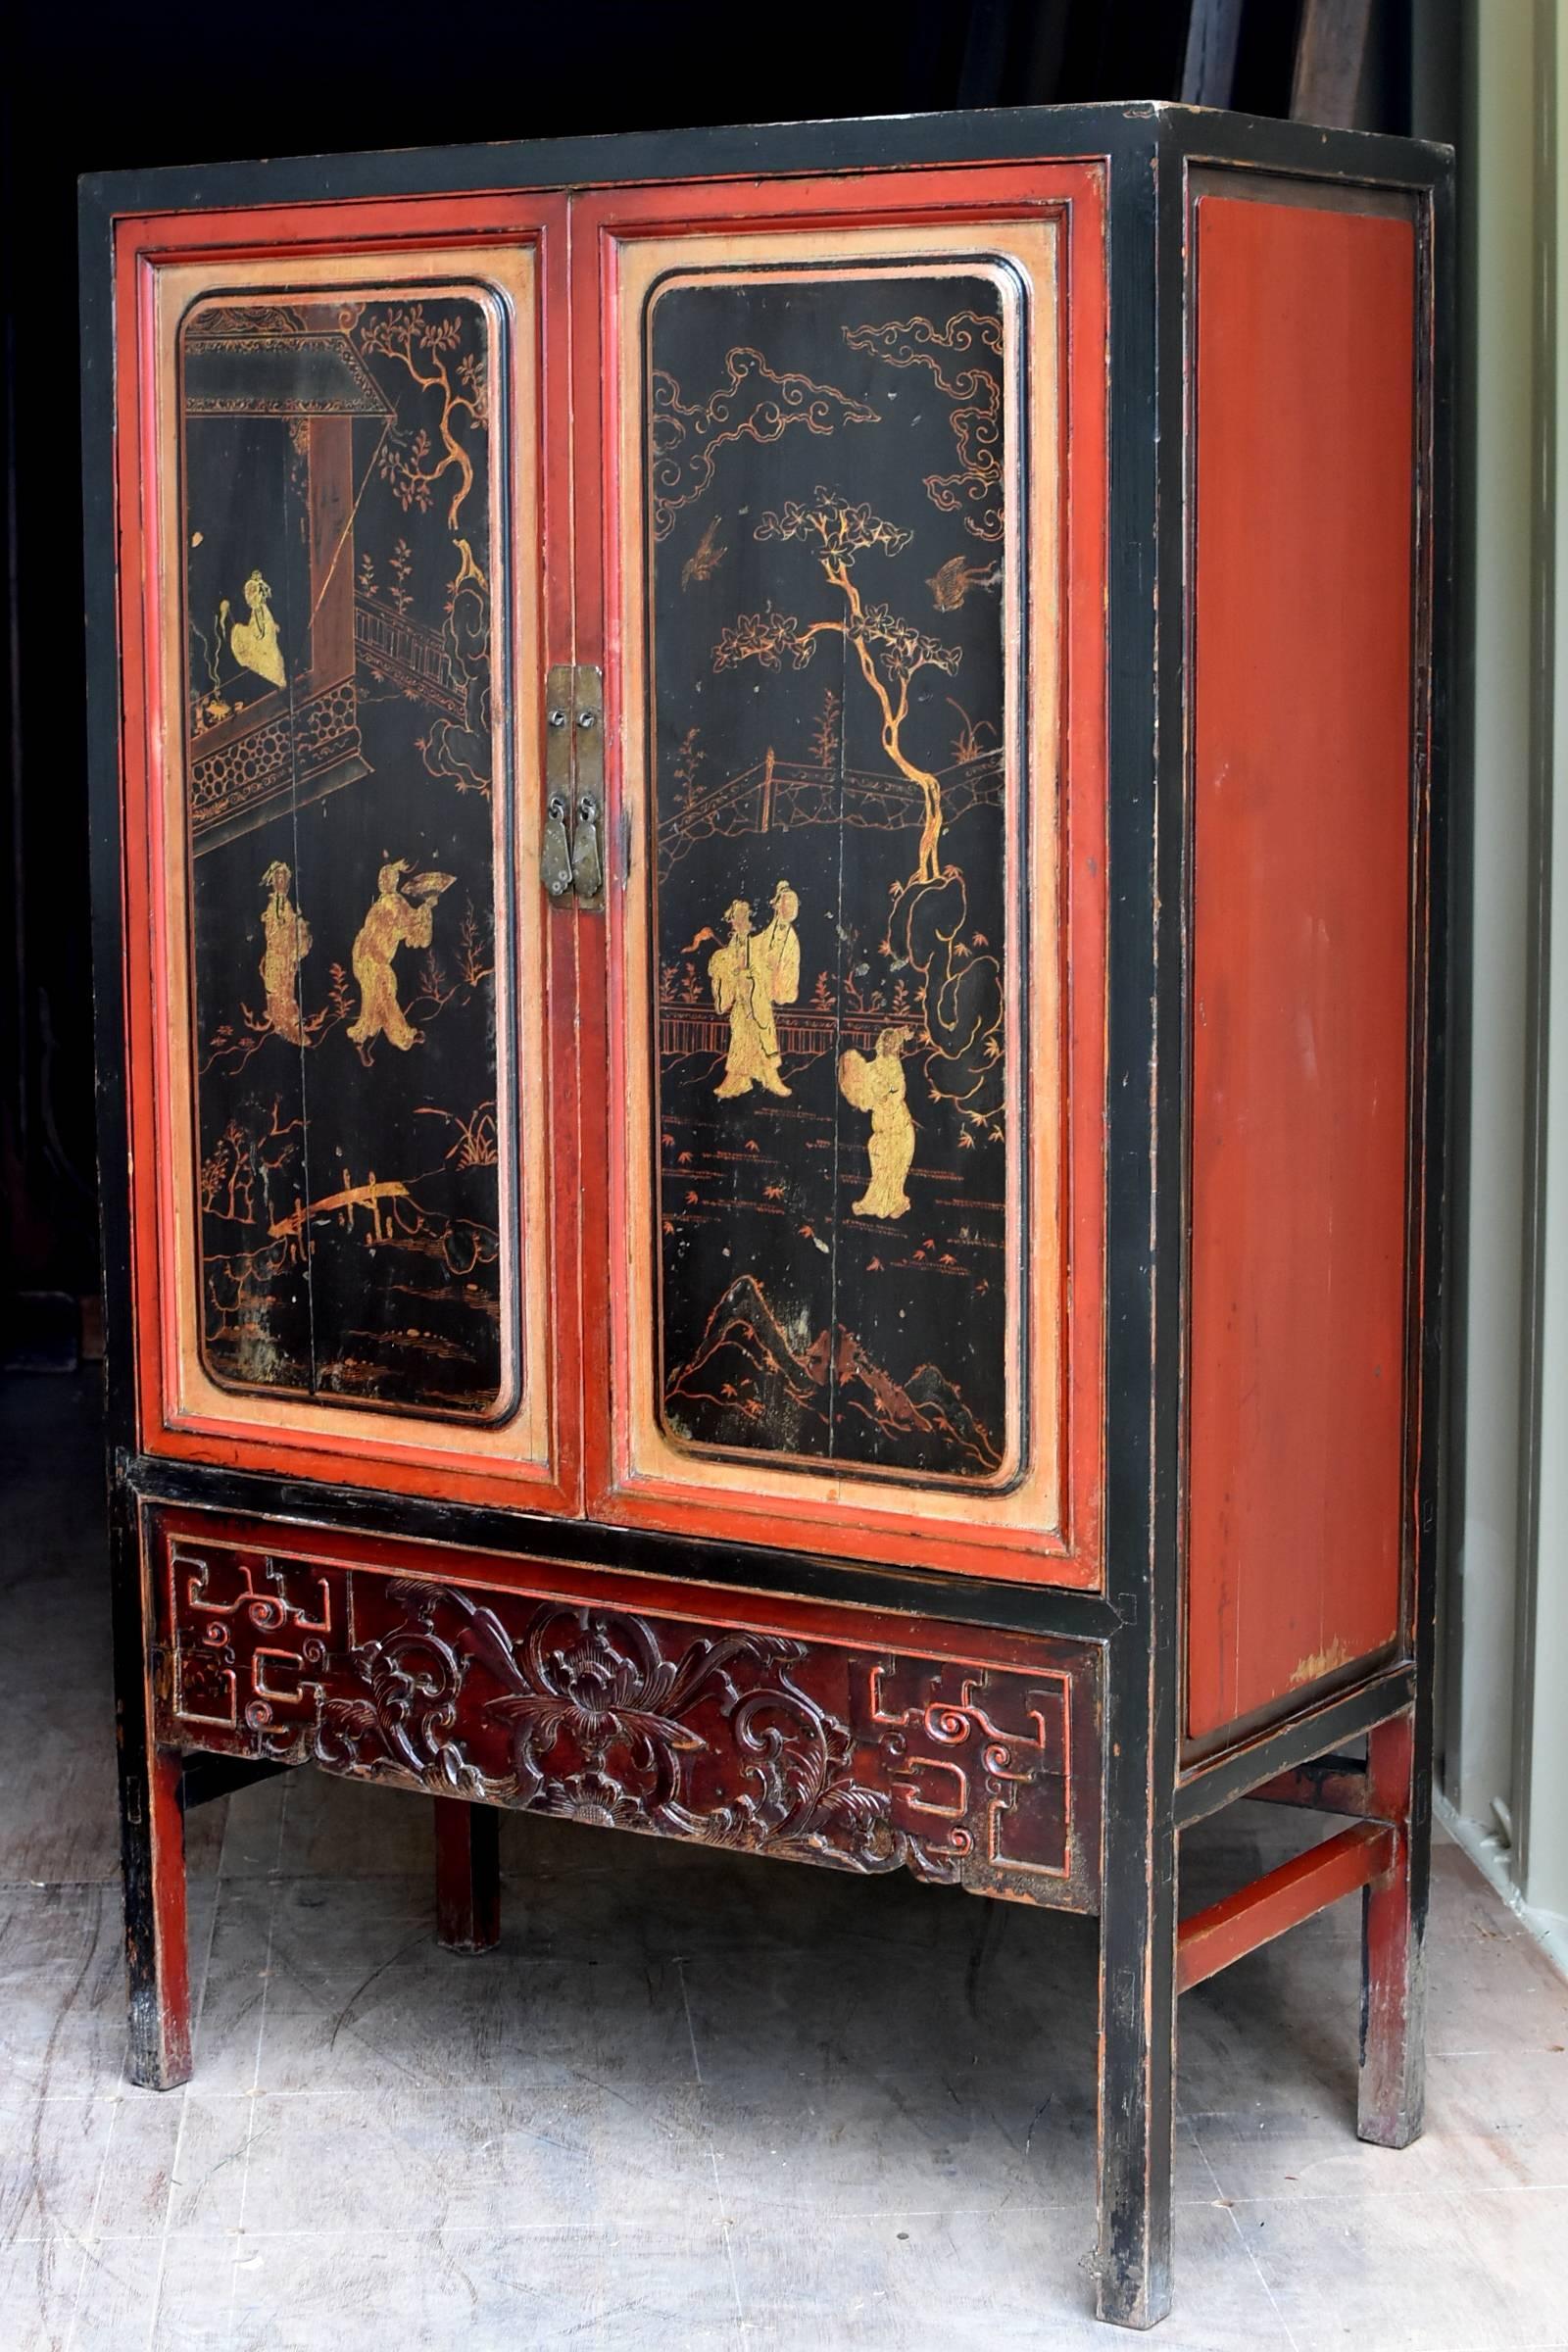 Beautiful cabinet with contrasting colors showcases the beauty of furniture made by Southern Chinese artist. Hand-painted scene depicts a family's happy leisure life at the home garden with pine trees, bridges, and a pavilion. The bottom section has